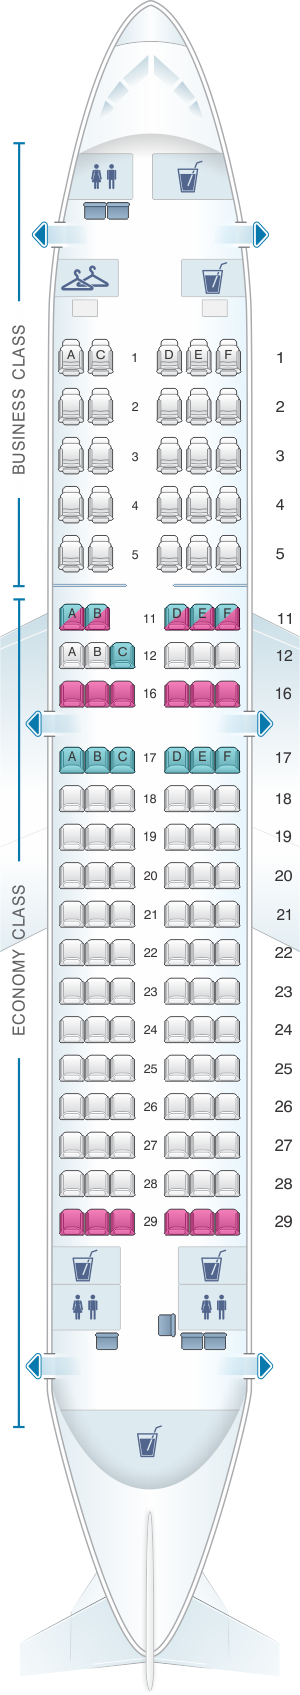 Seat map for South African Airways Airbus A319 100